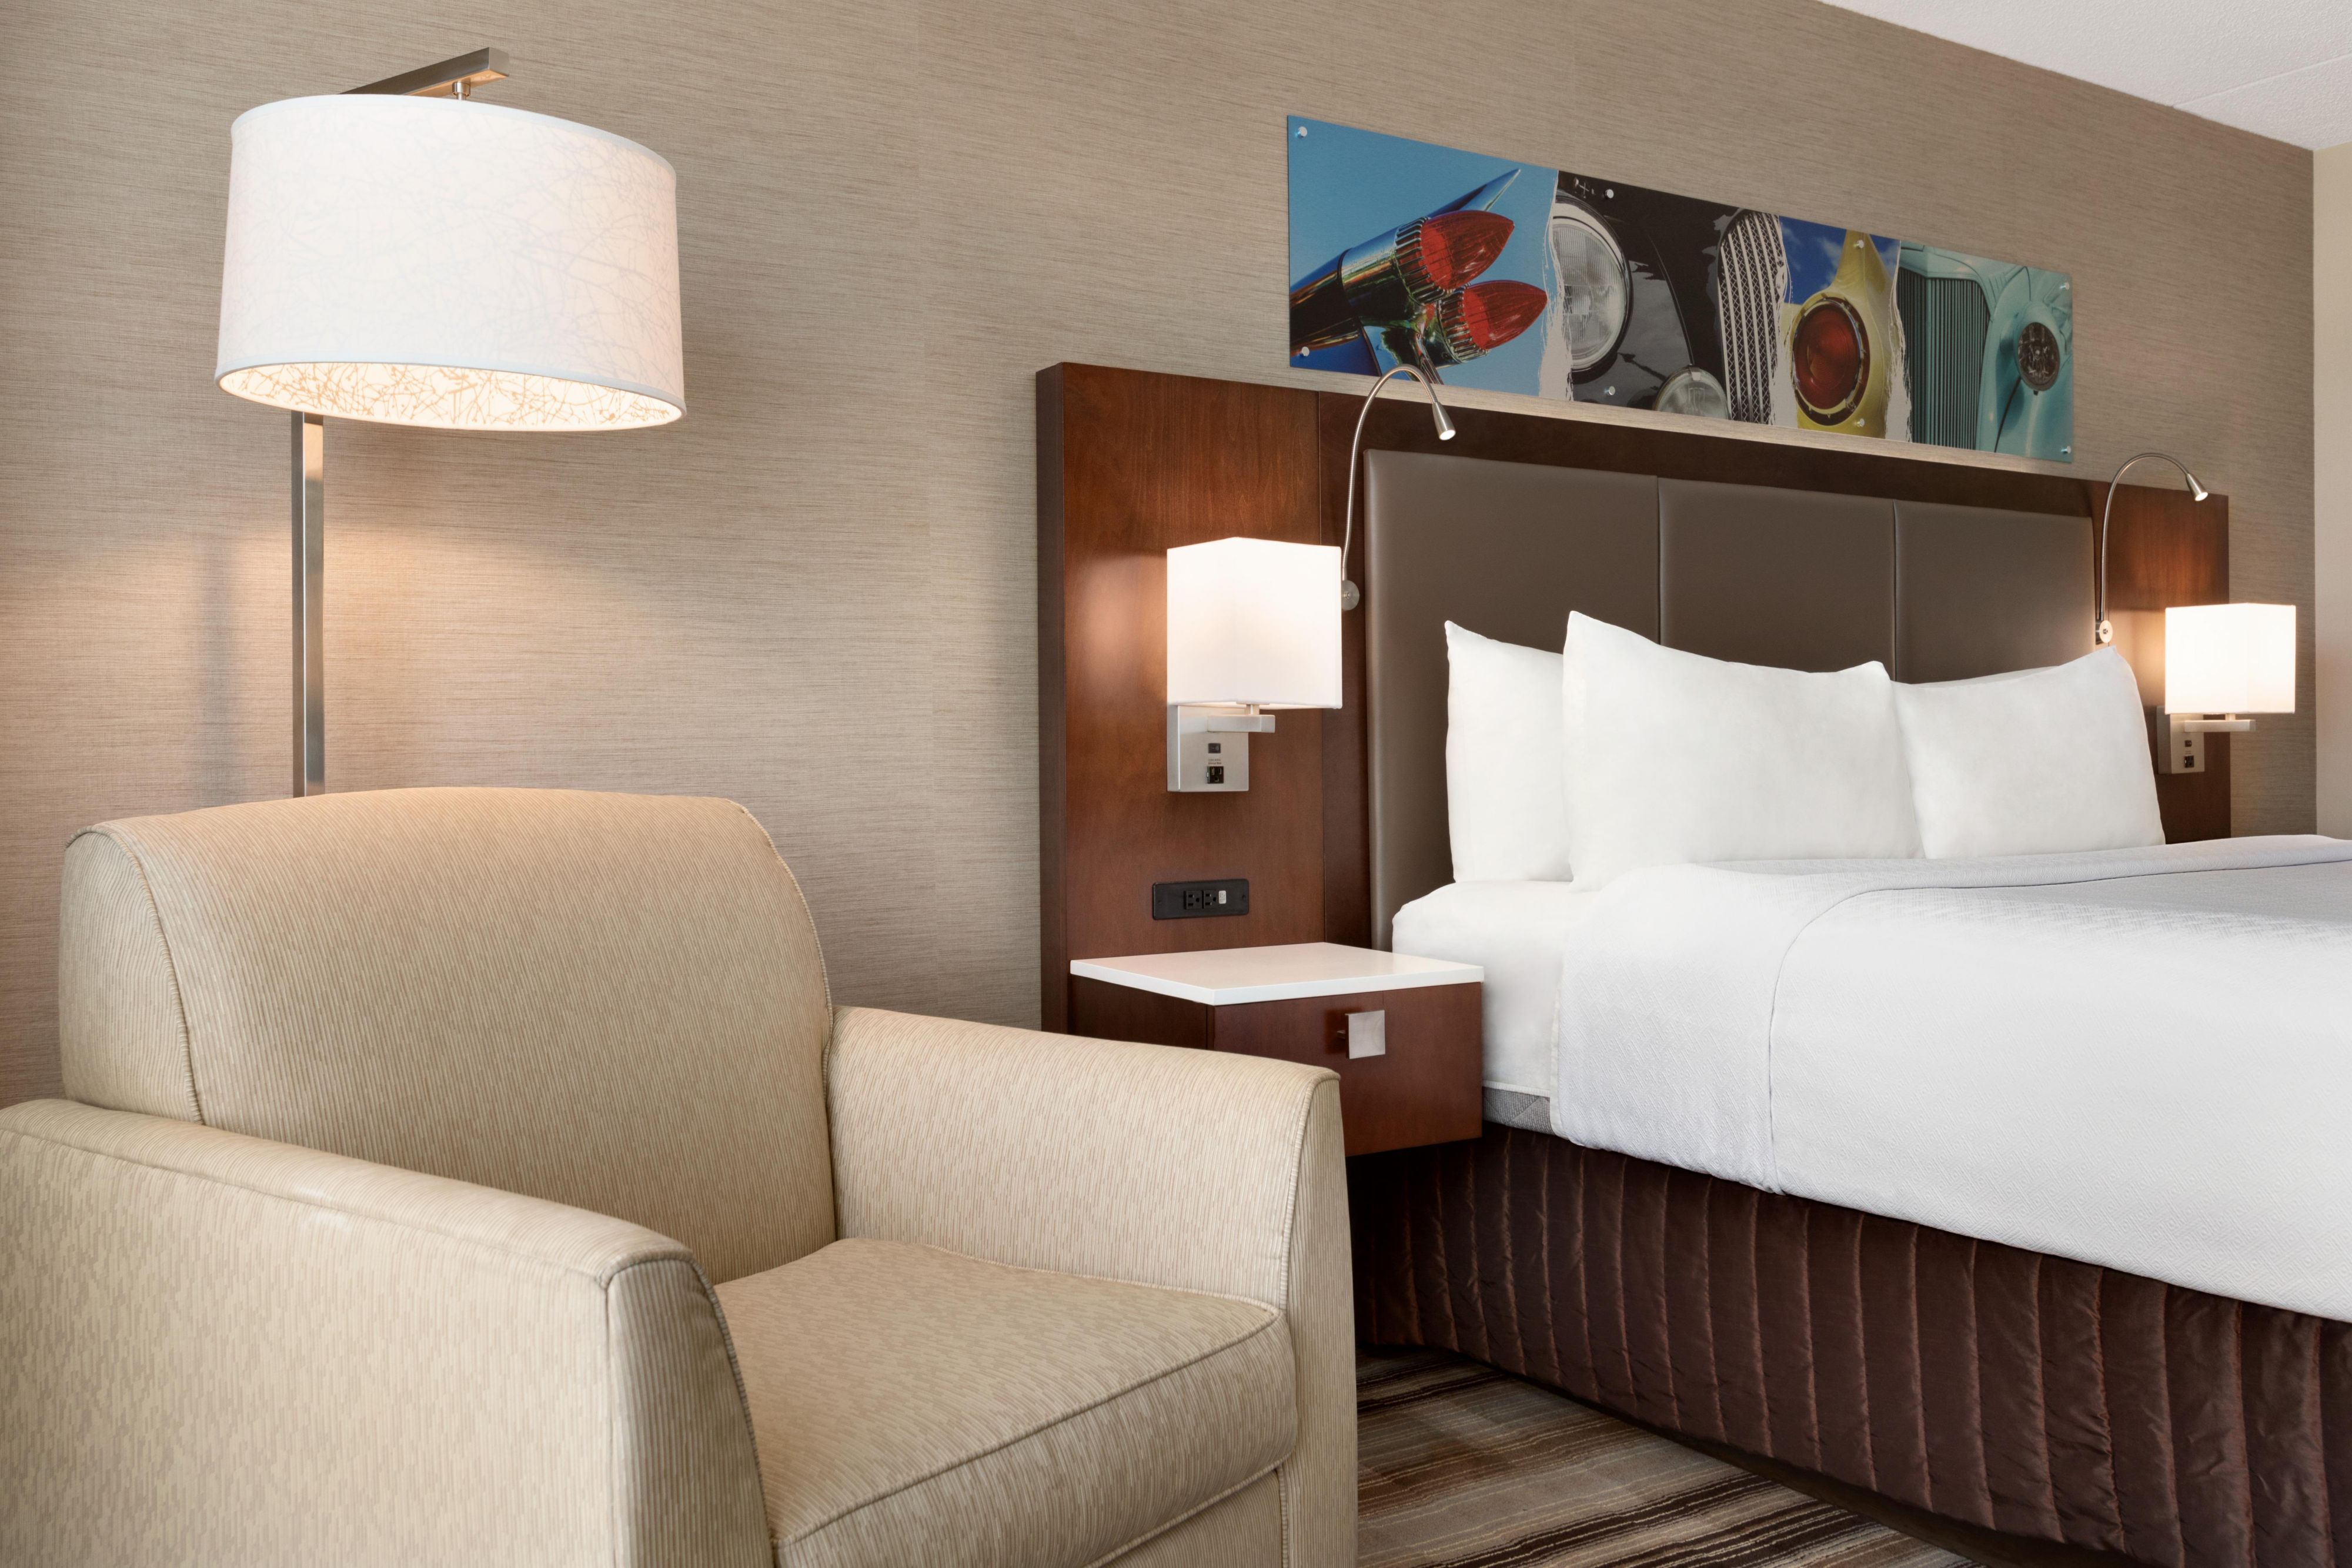 Enjoy updated furnishings and modern amenities in executive rooms.